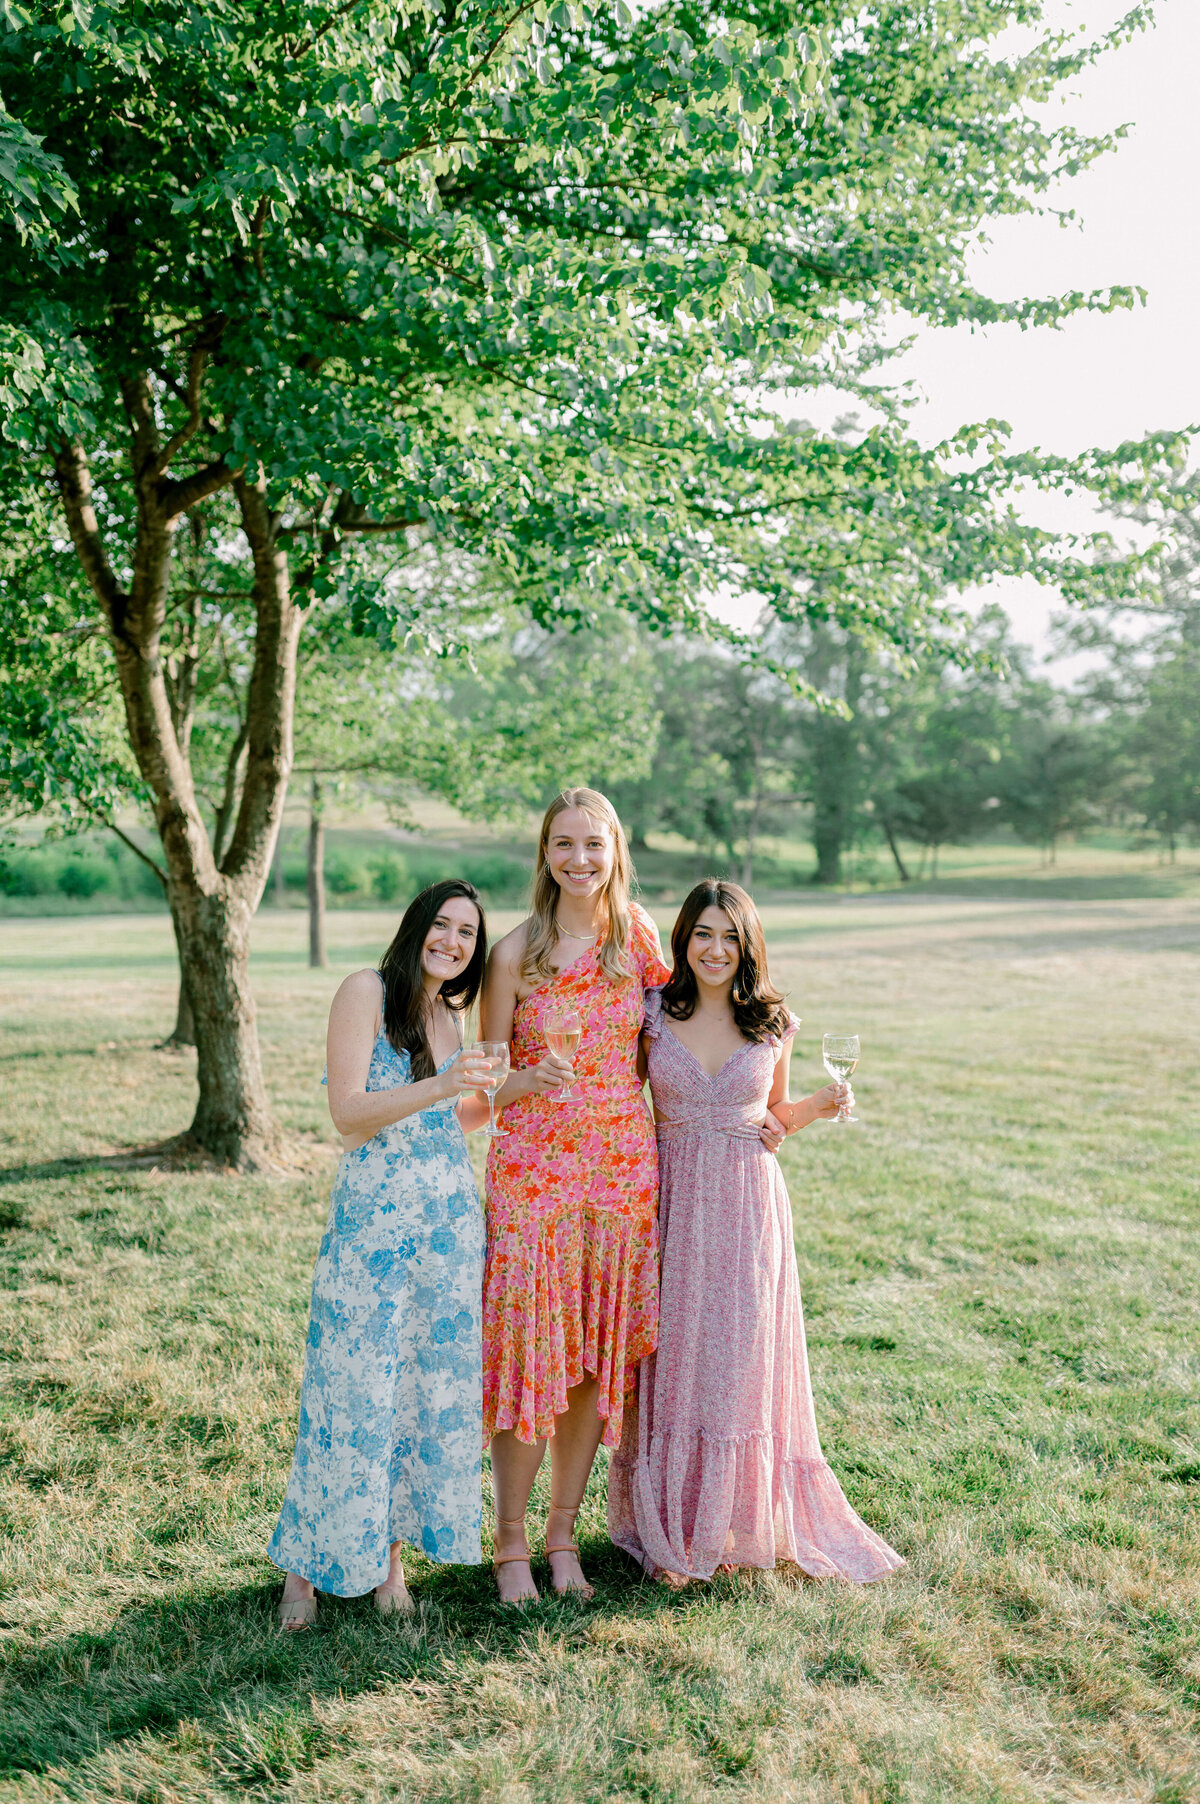 Guests in floral dresses  coming together to take a photo during an outdoor cocktail hour